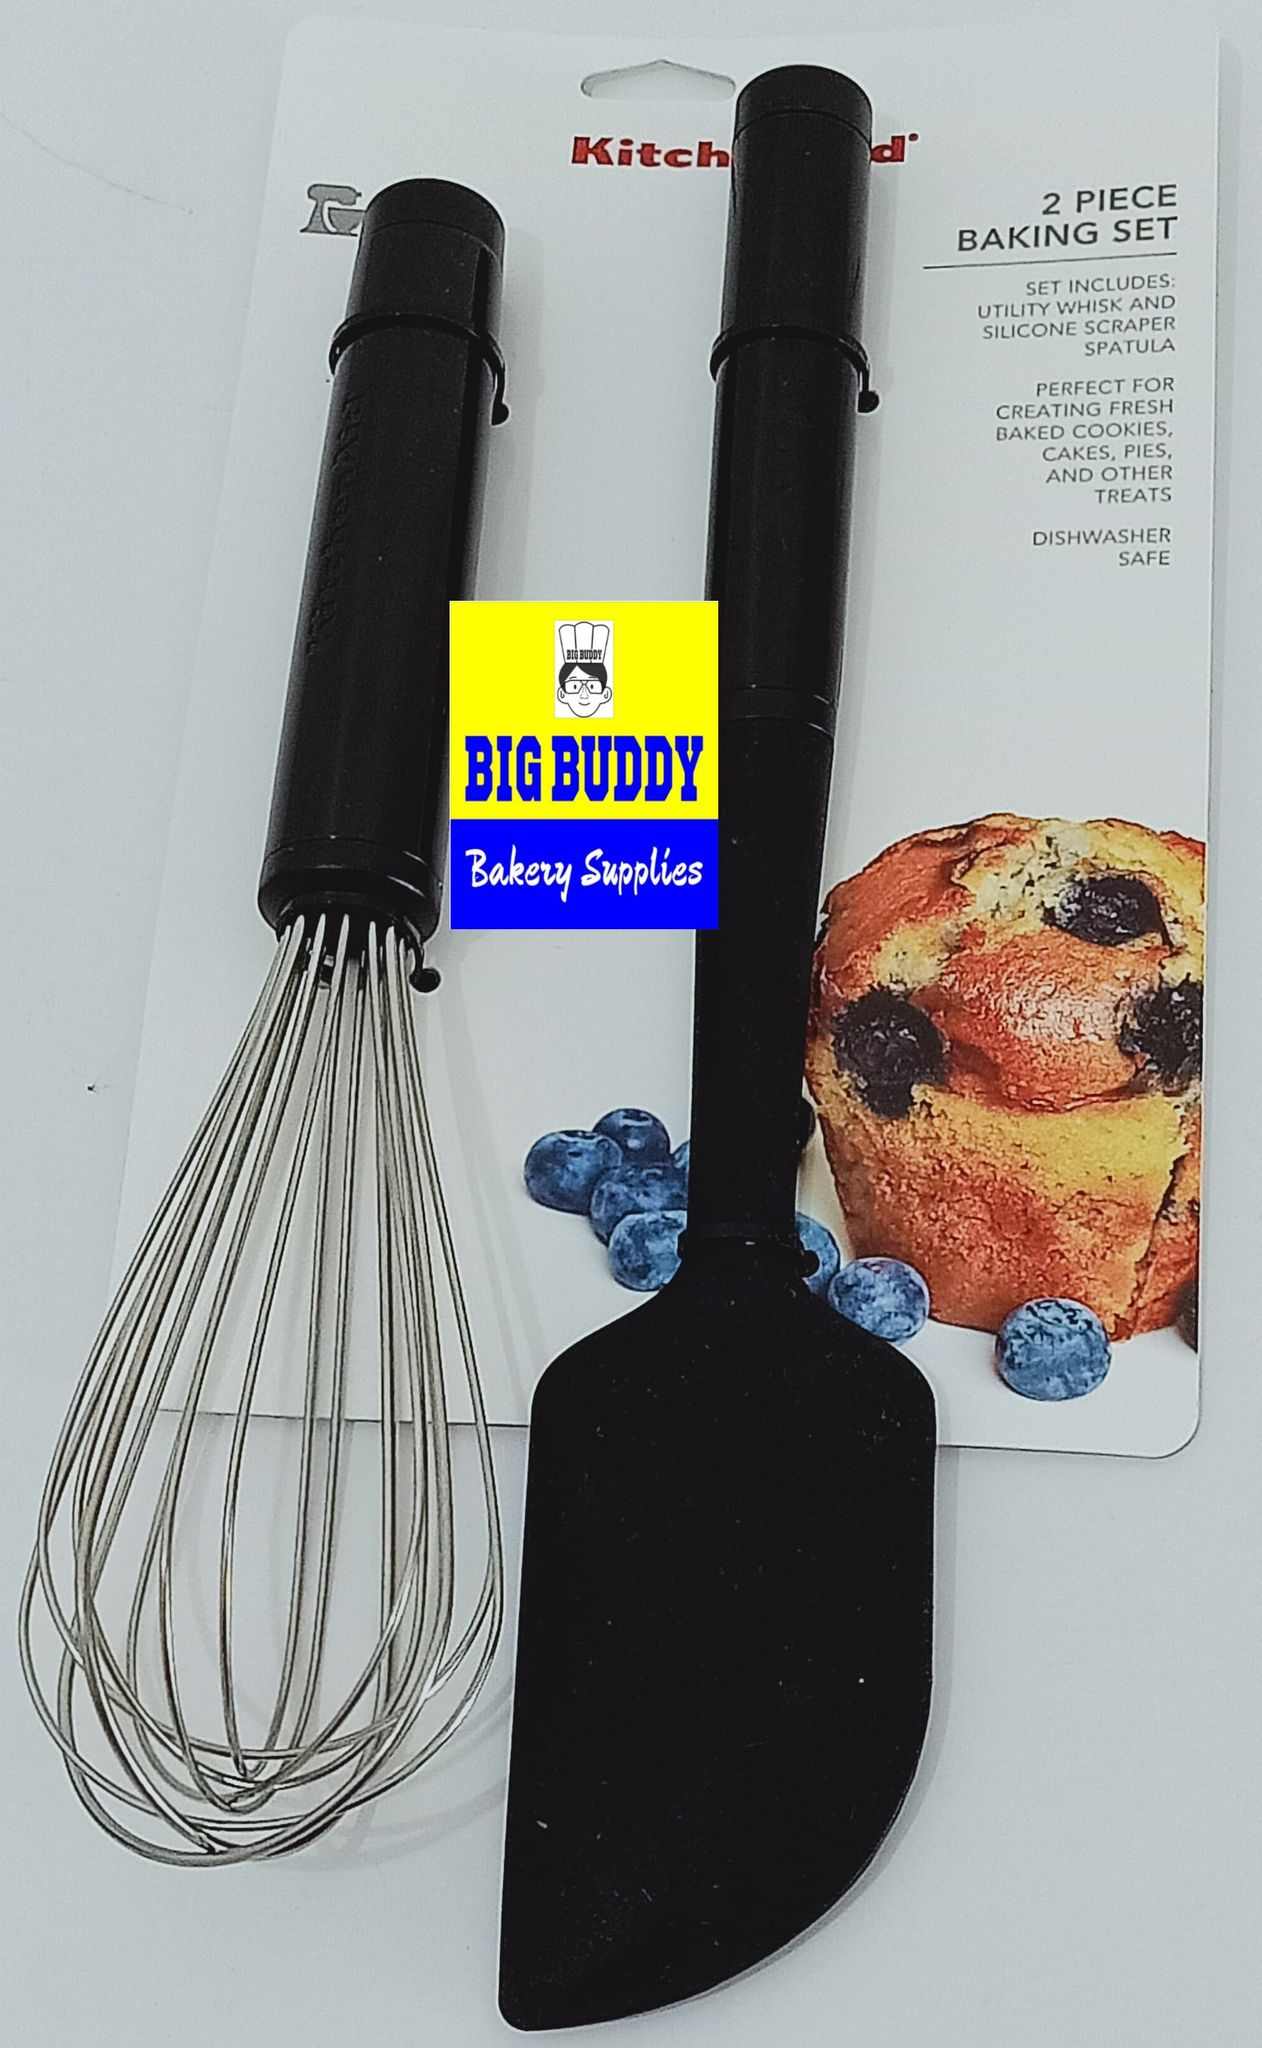 KITCHEN AID 2 Piece Baking Set Utility Whisk And Silicone Scraper